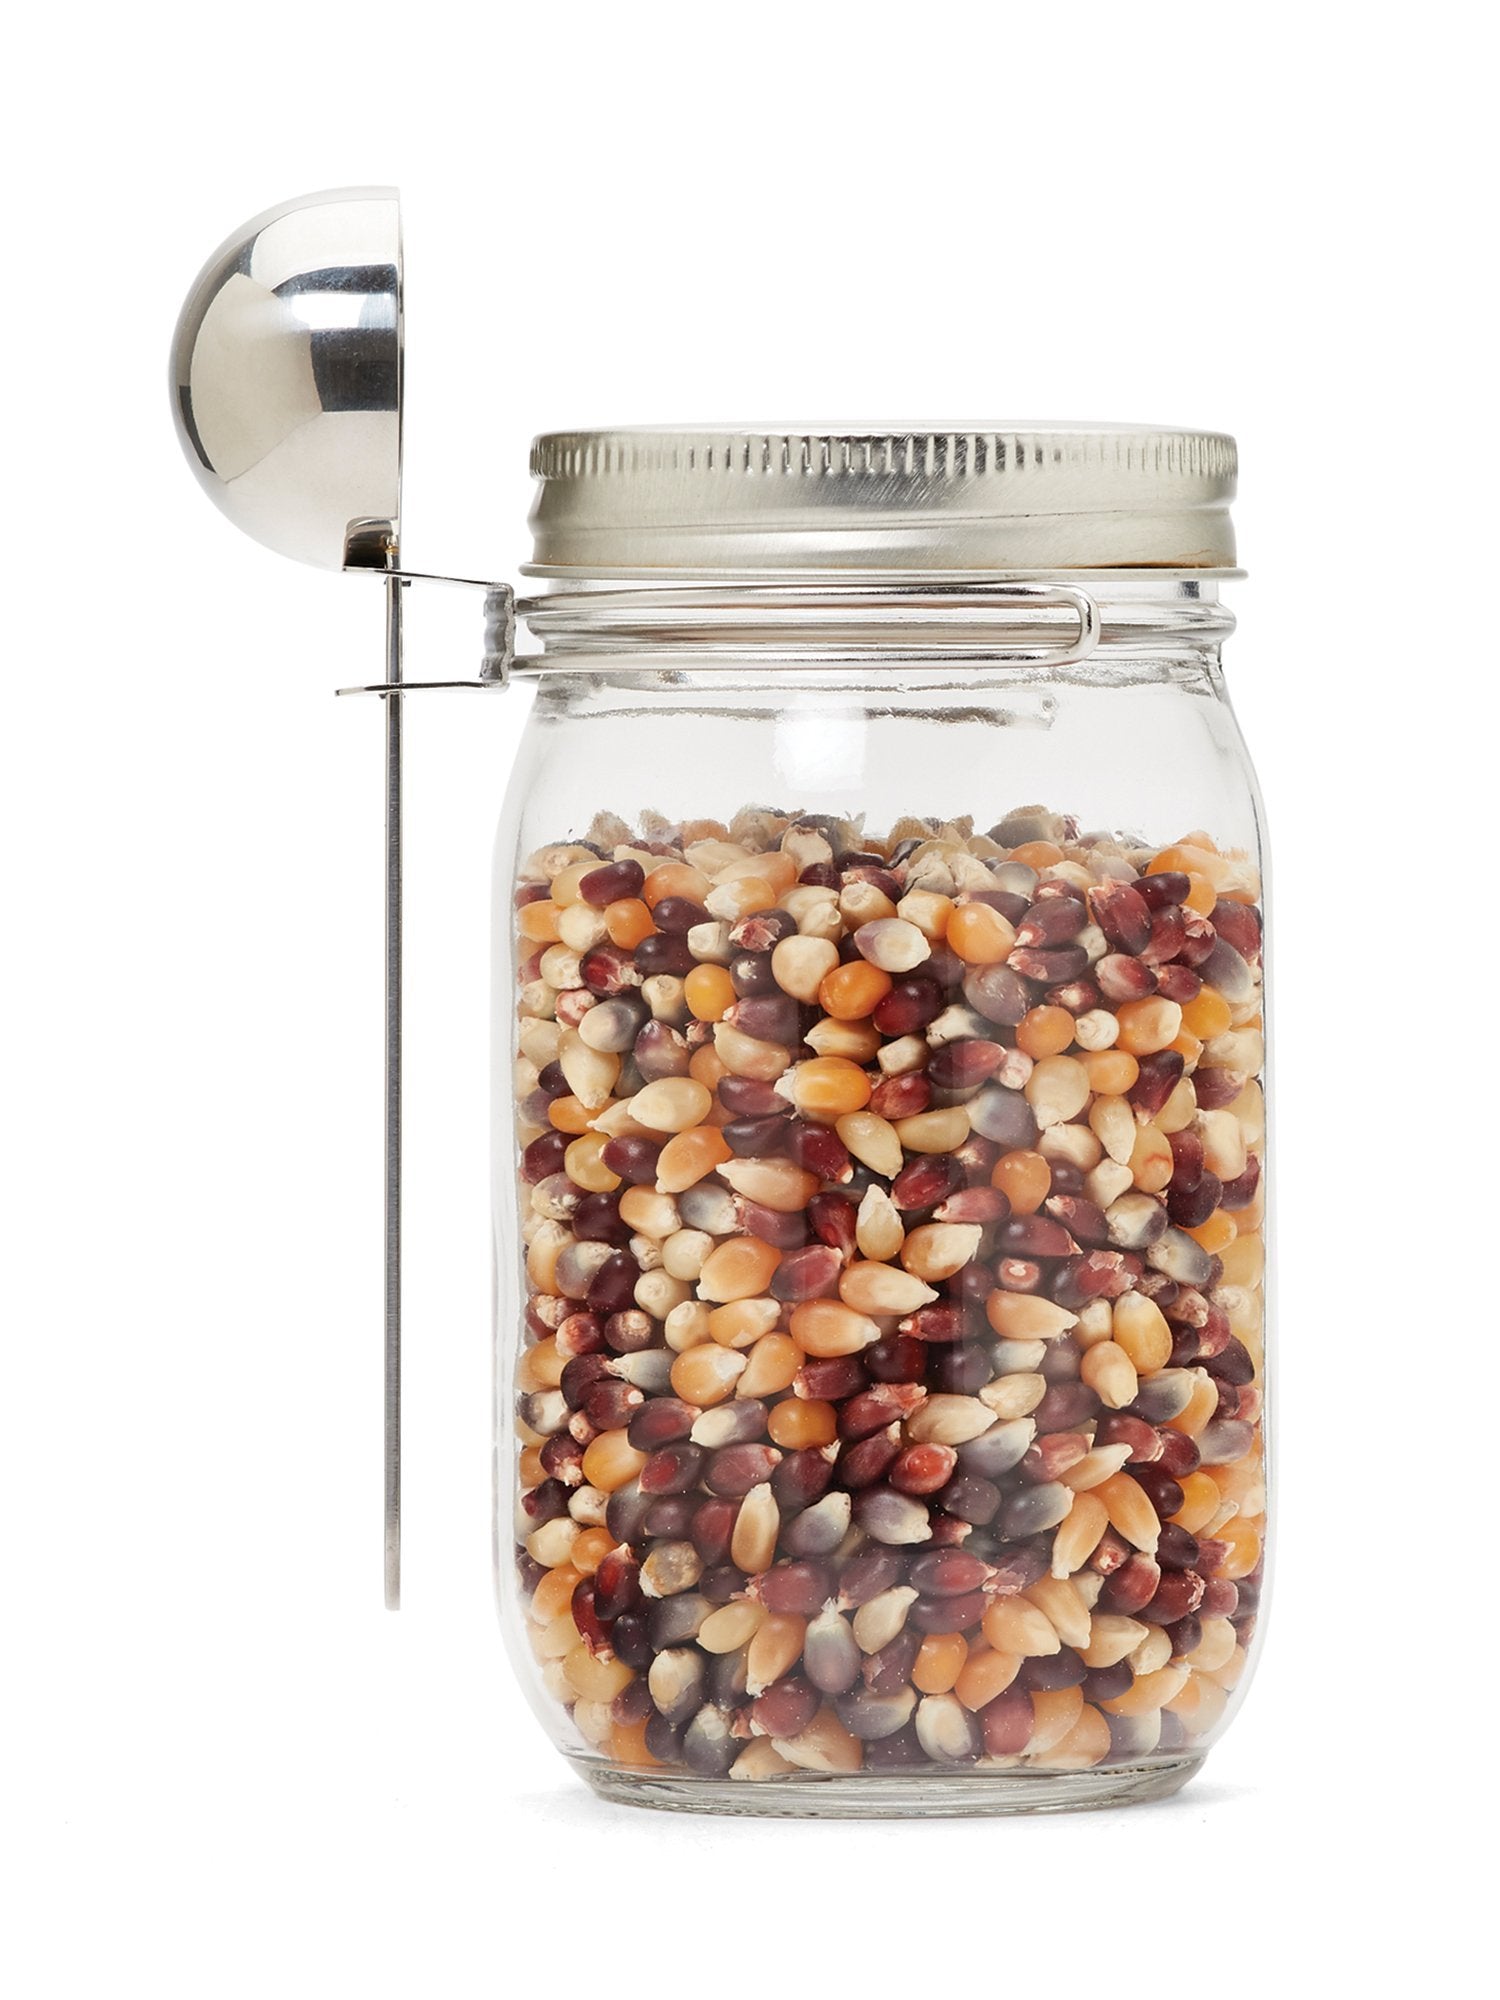 16 oz reusable glass mason jar with a silver lid and a stainless steel coffee scoop and clip